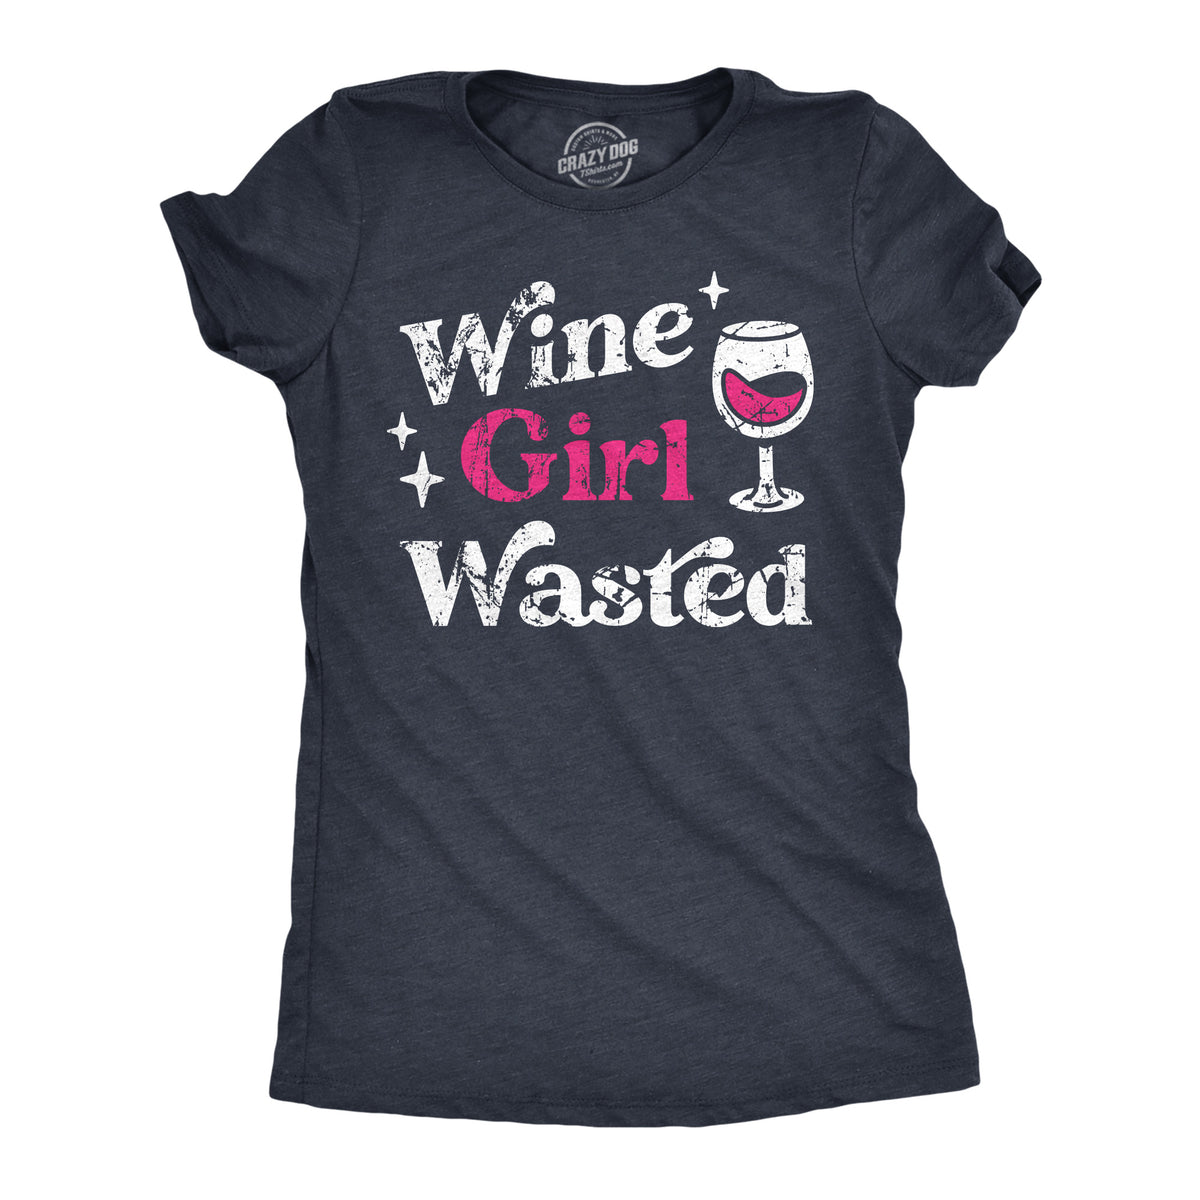 Funny Heather Navy - Wine Girl Wasted Wine Girl Wasted Womens T Shirt Nerdy Wine Drinking Tee